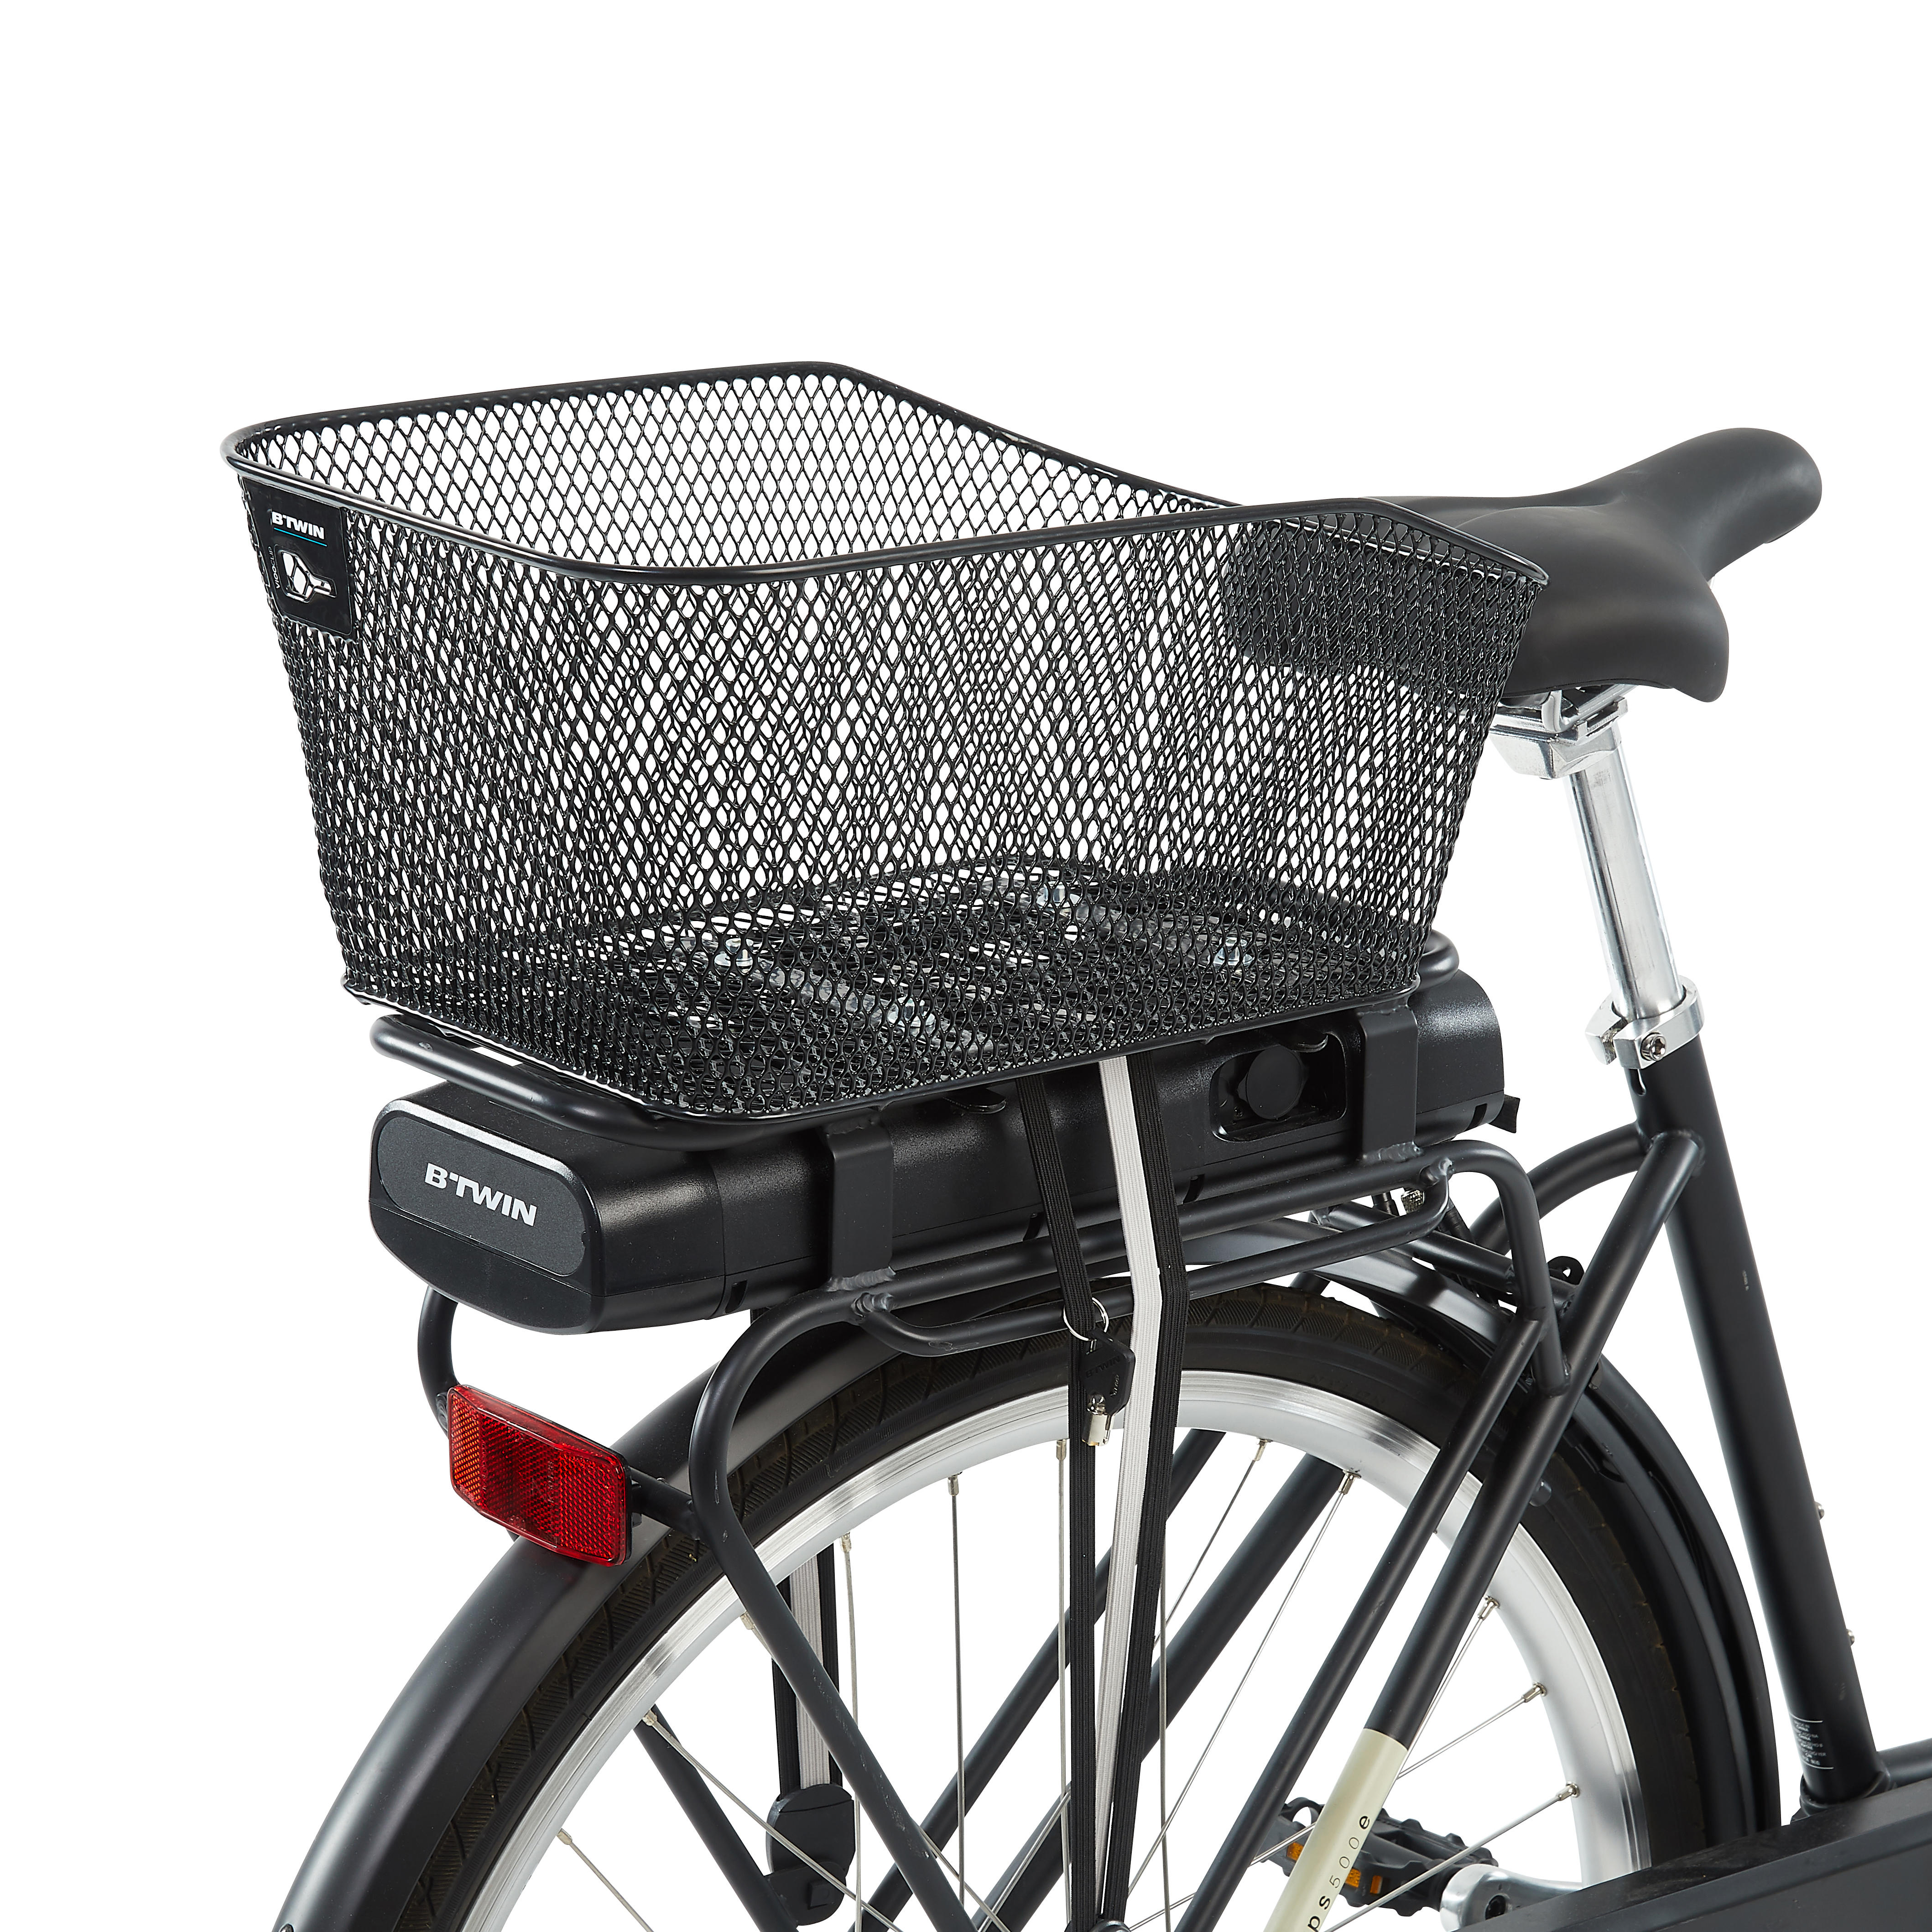 baskets for the back of a bicycle